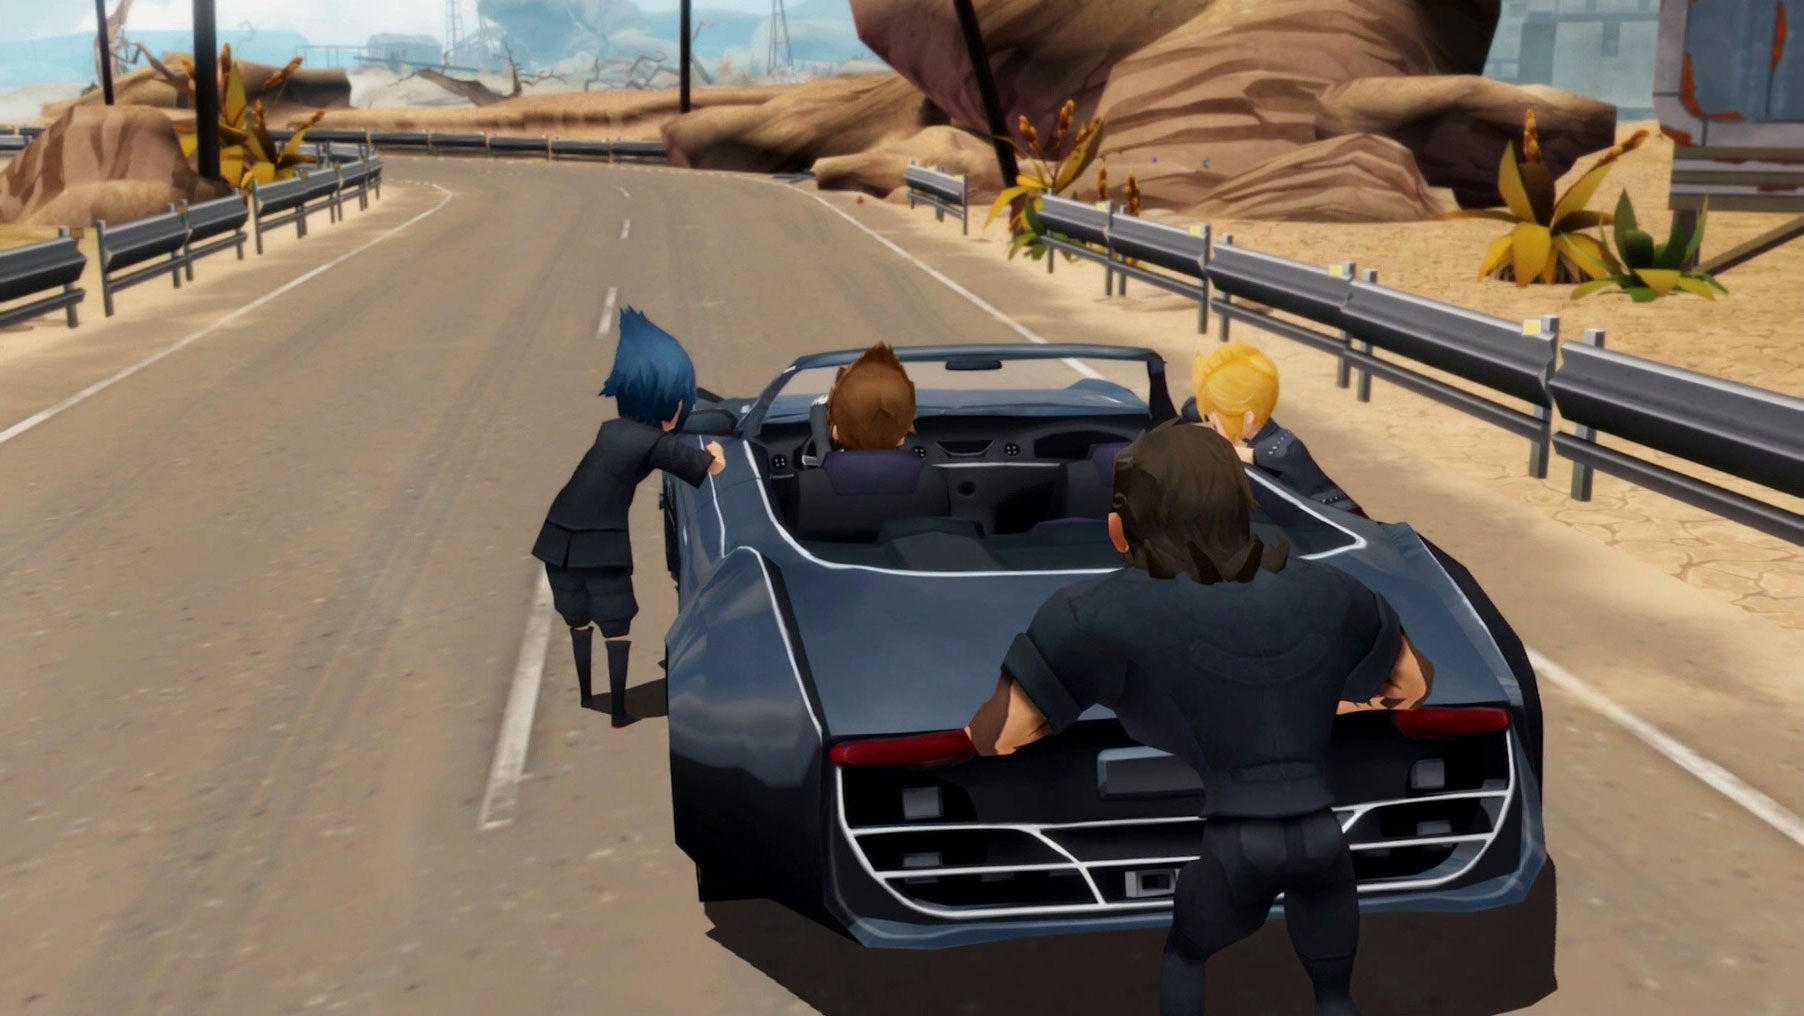 Image for Final Fantasy 15 Pocket Edition released early on iOS, price is $19.99 and requires nearly 1.5GB of space